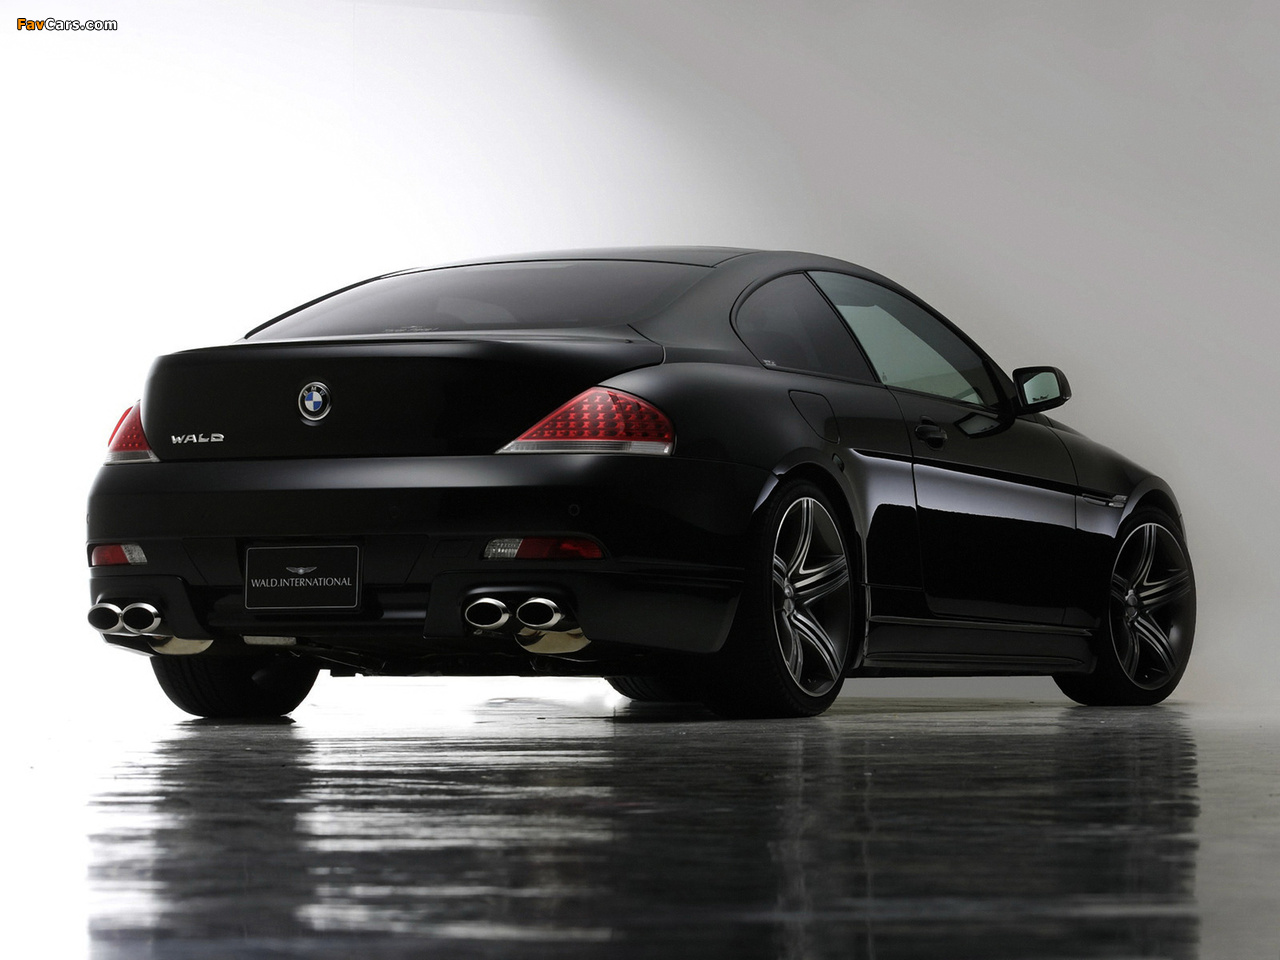 WALD BMW 6 Series (E63) 2004 pictures (1280 x 960)